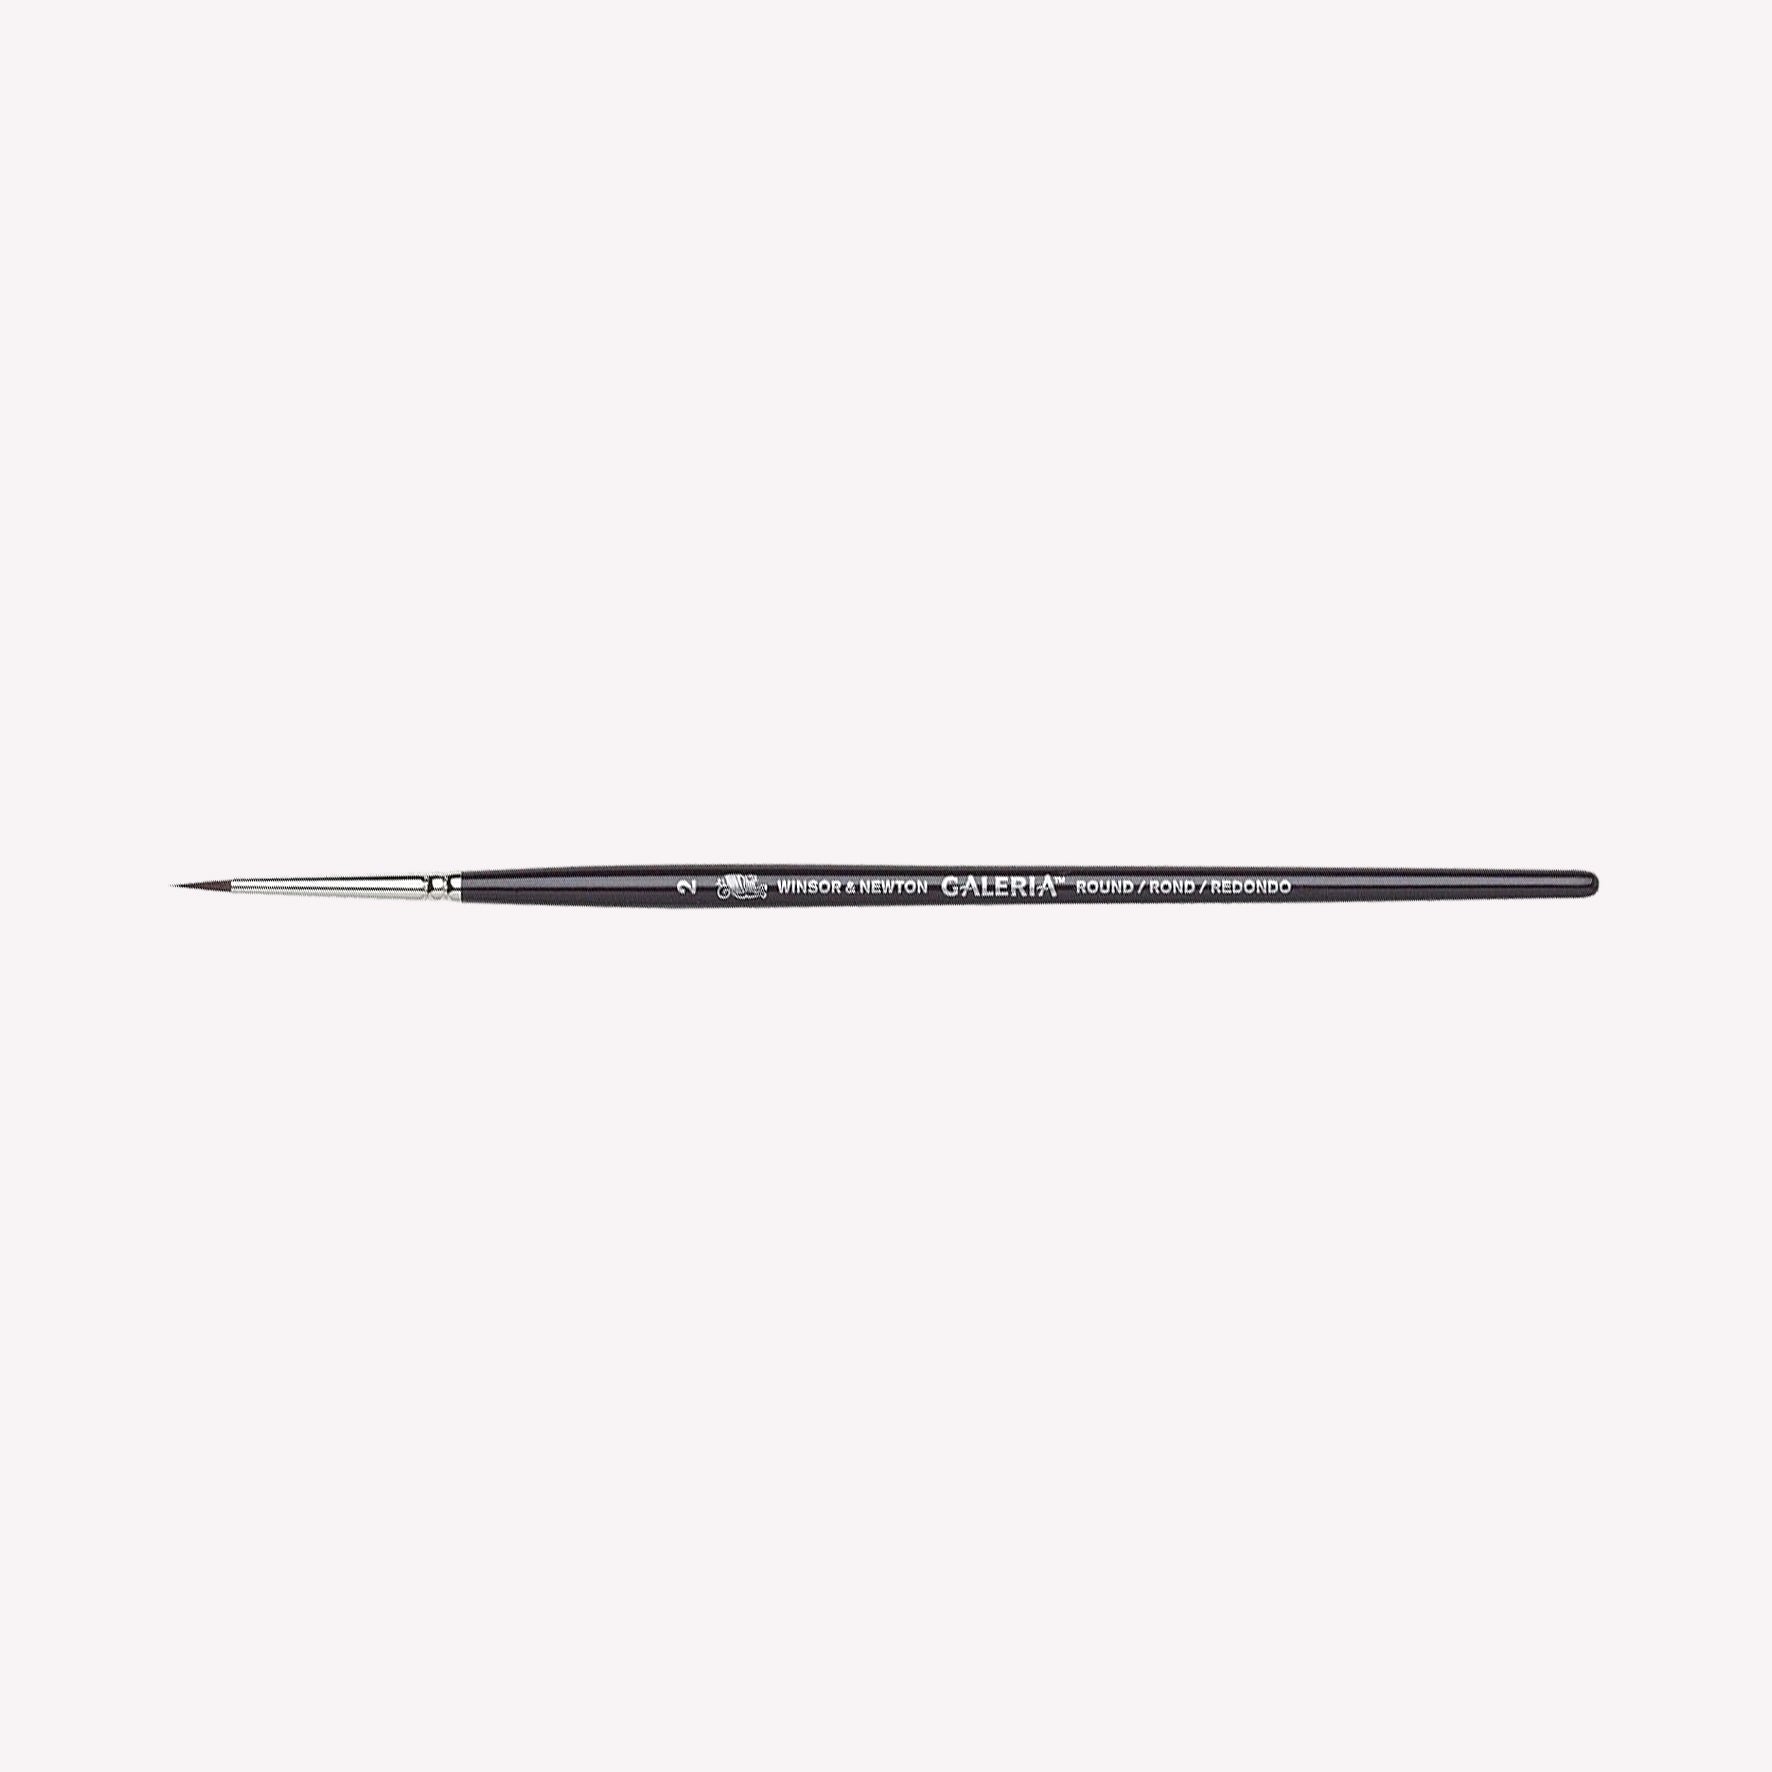 Winsor & Newton Galeria Round paintbrush in size 2. Brushes have synthetic filaments, and short wooden handles. 